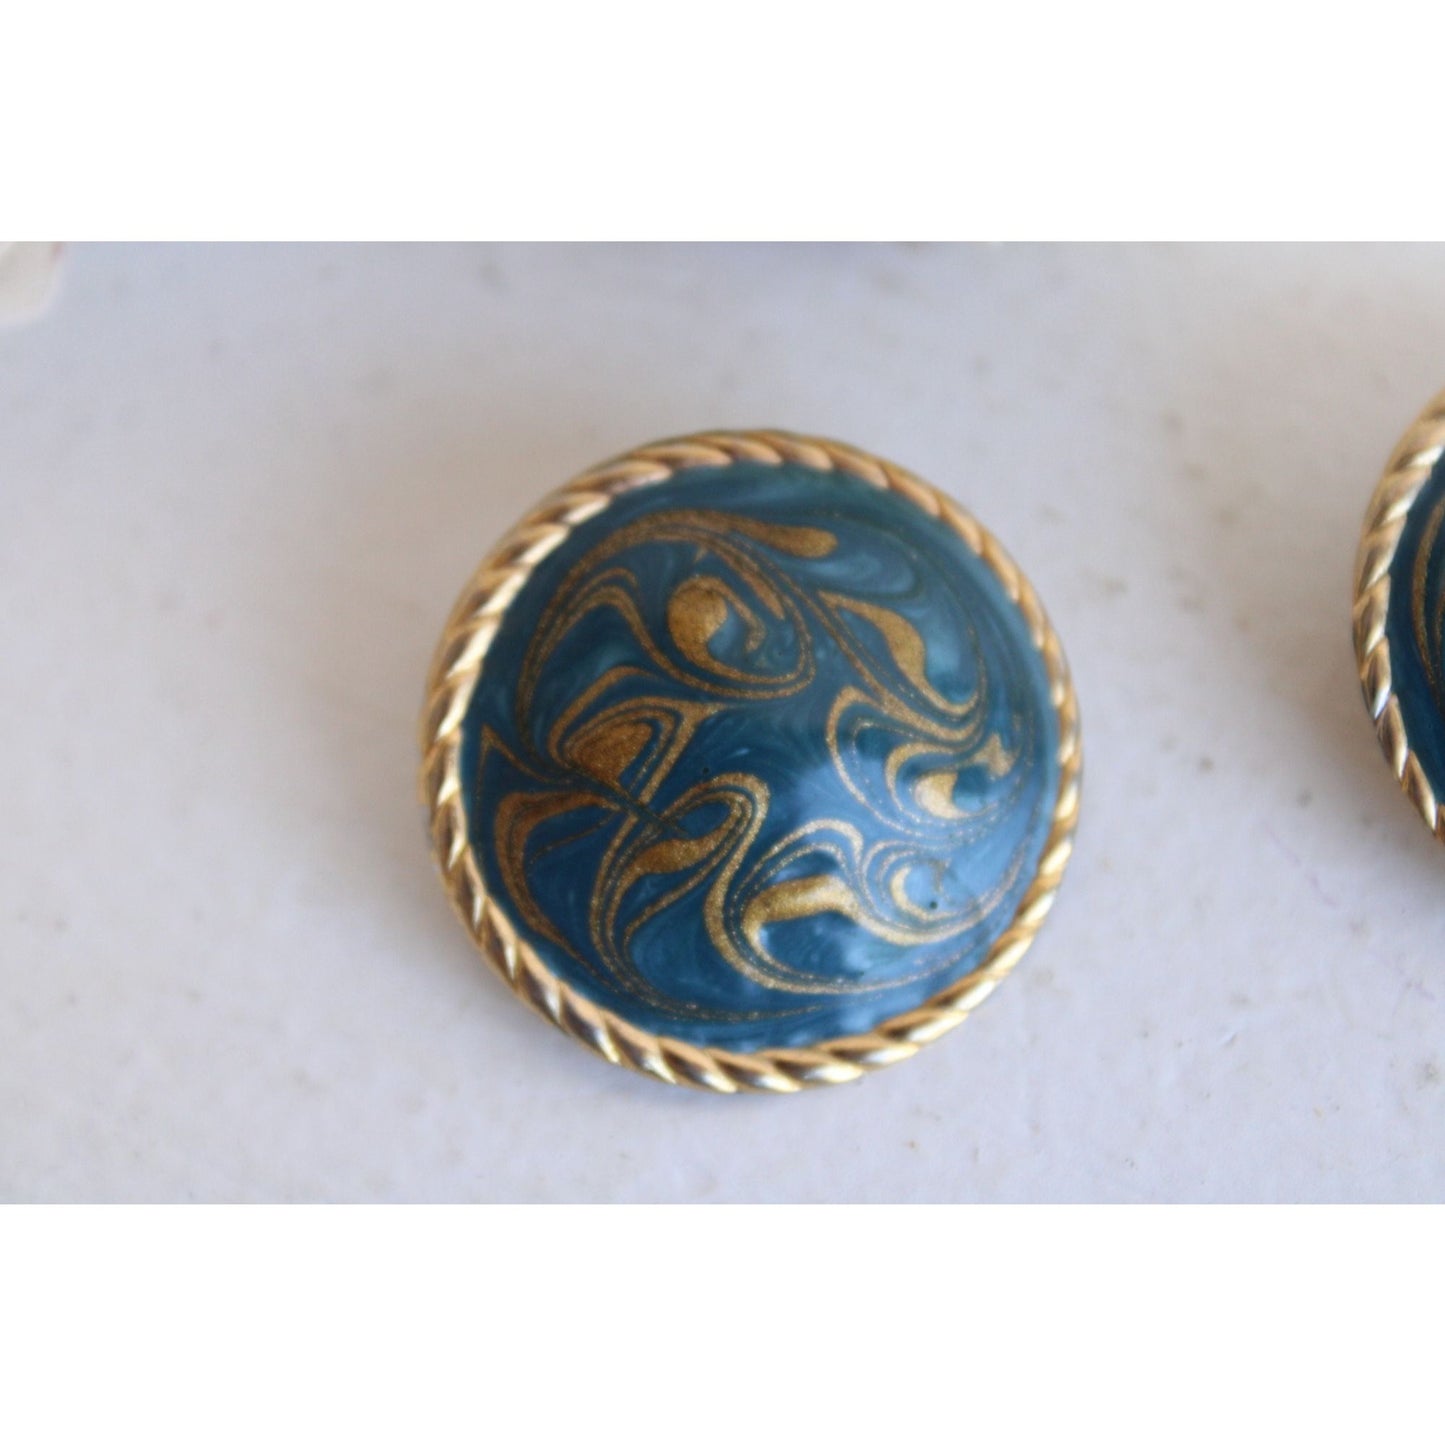 Vintage 1960s Enameled Blue And Gold Earrings